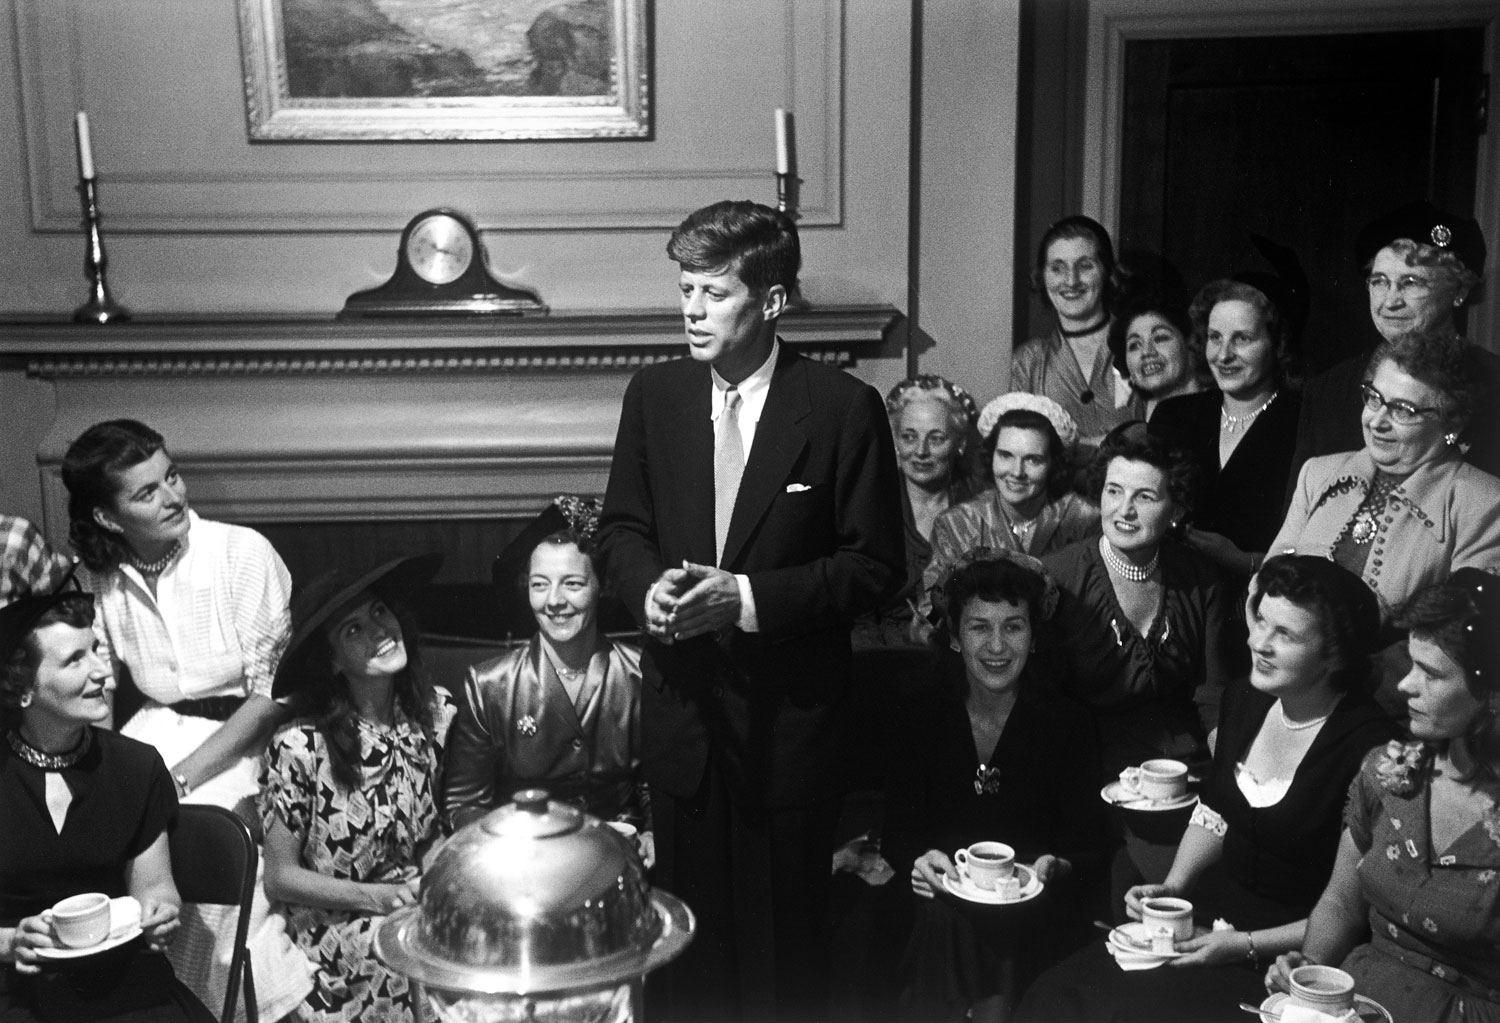 Senatorial candidate John F. Kennedy attends a tea party given by female supporters, 1952.